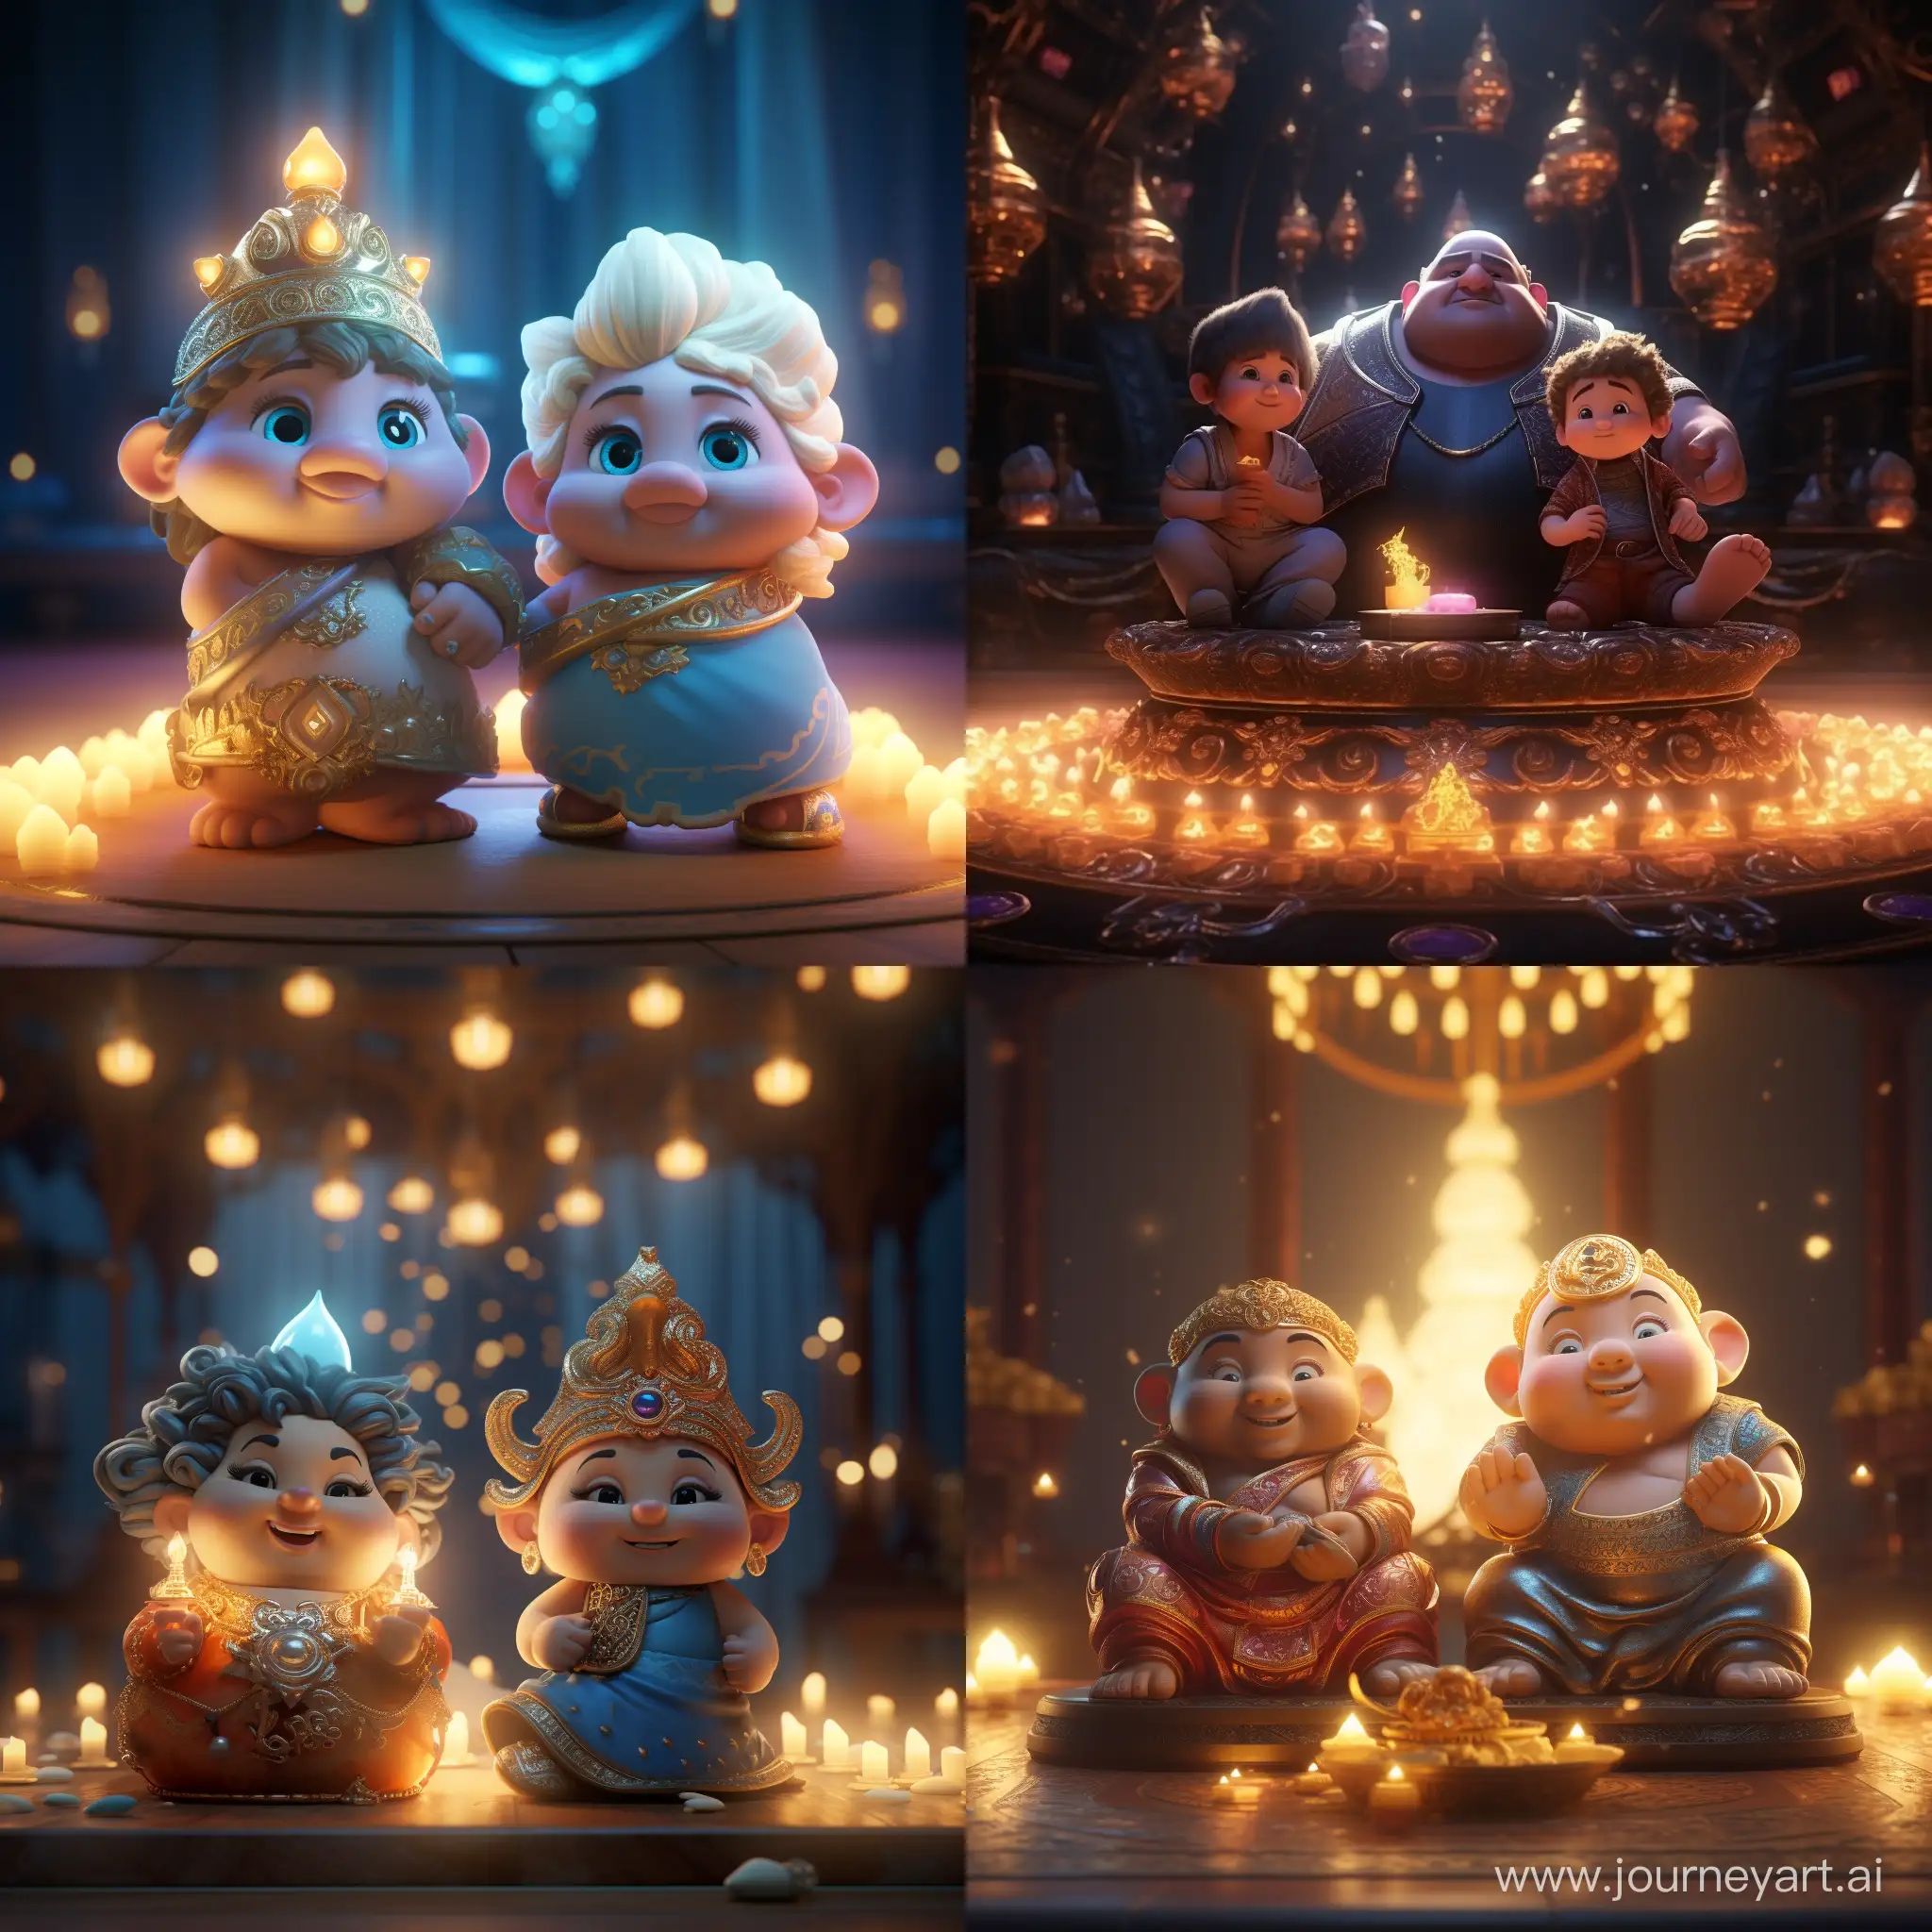 OG-Buda-and-TOXI-in-Pixar-Animation-Style-HighQuality-4K-Render-with-Cinematic-Lighting